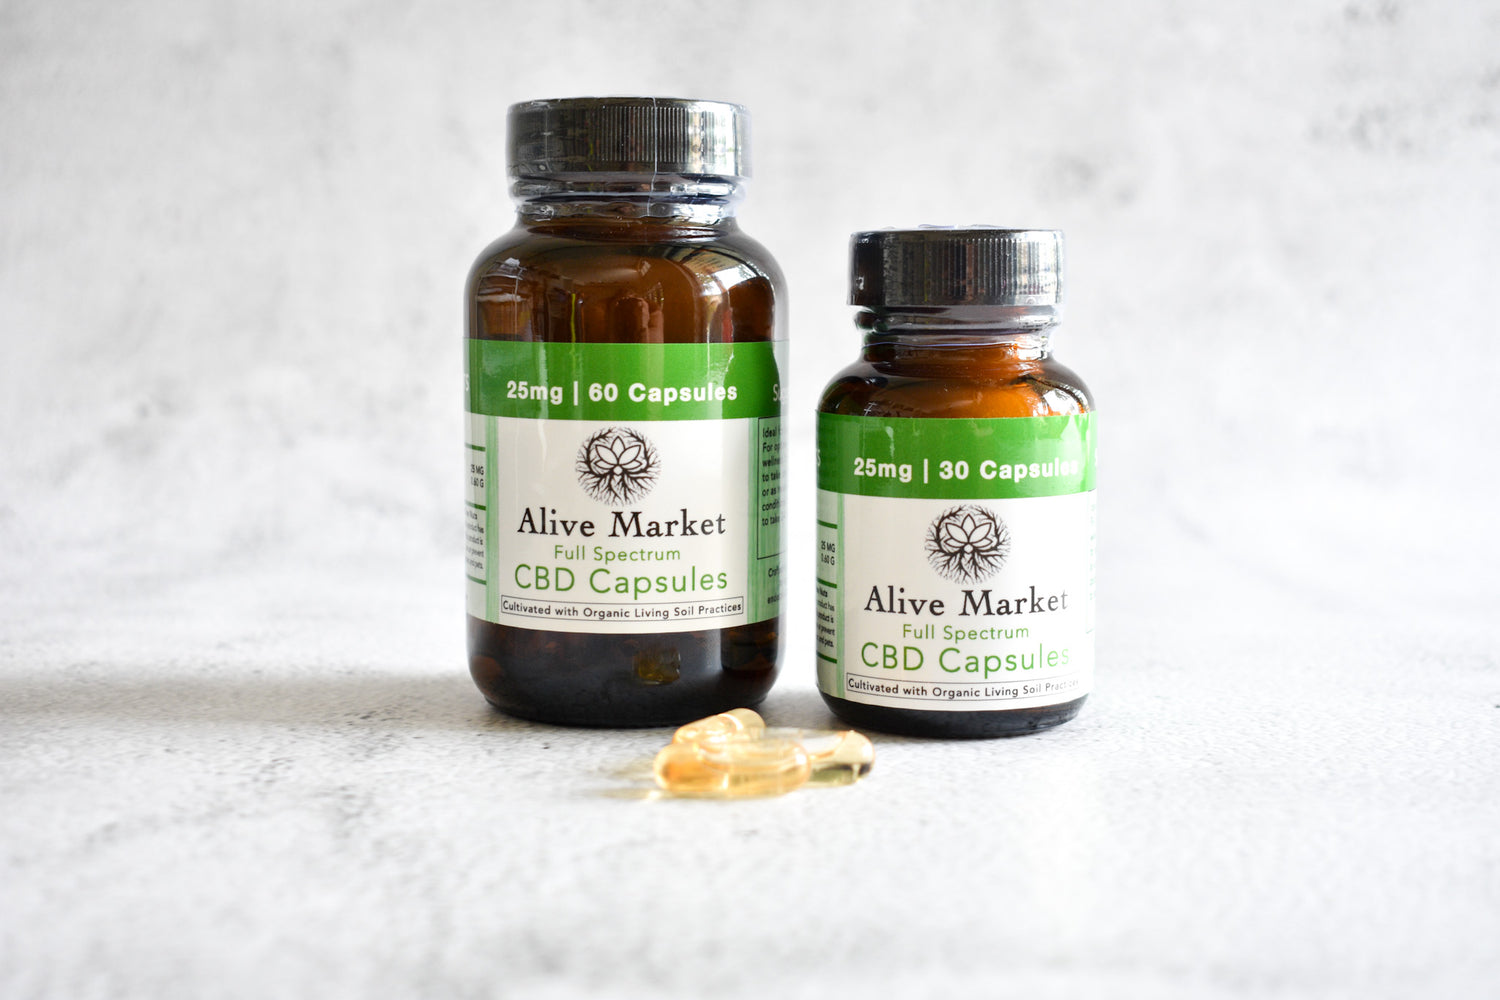 an image of two bottles of CBD capsules